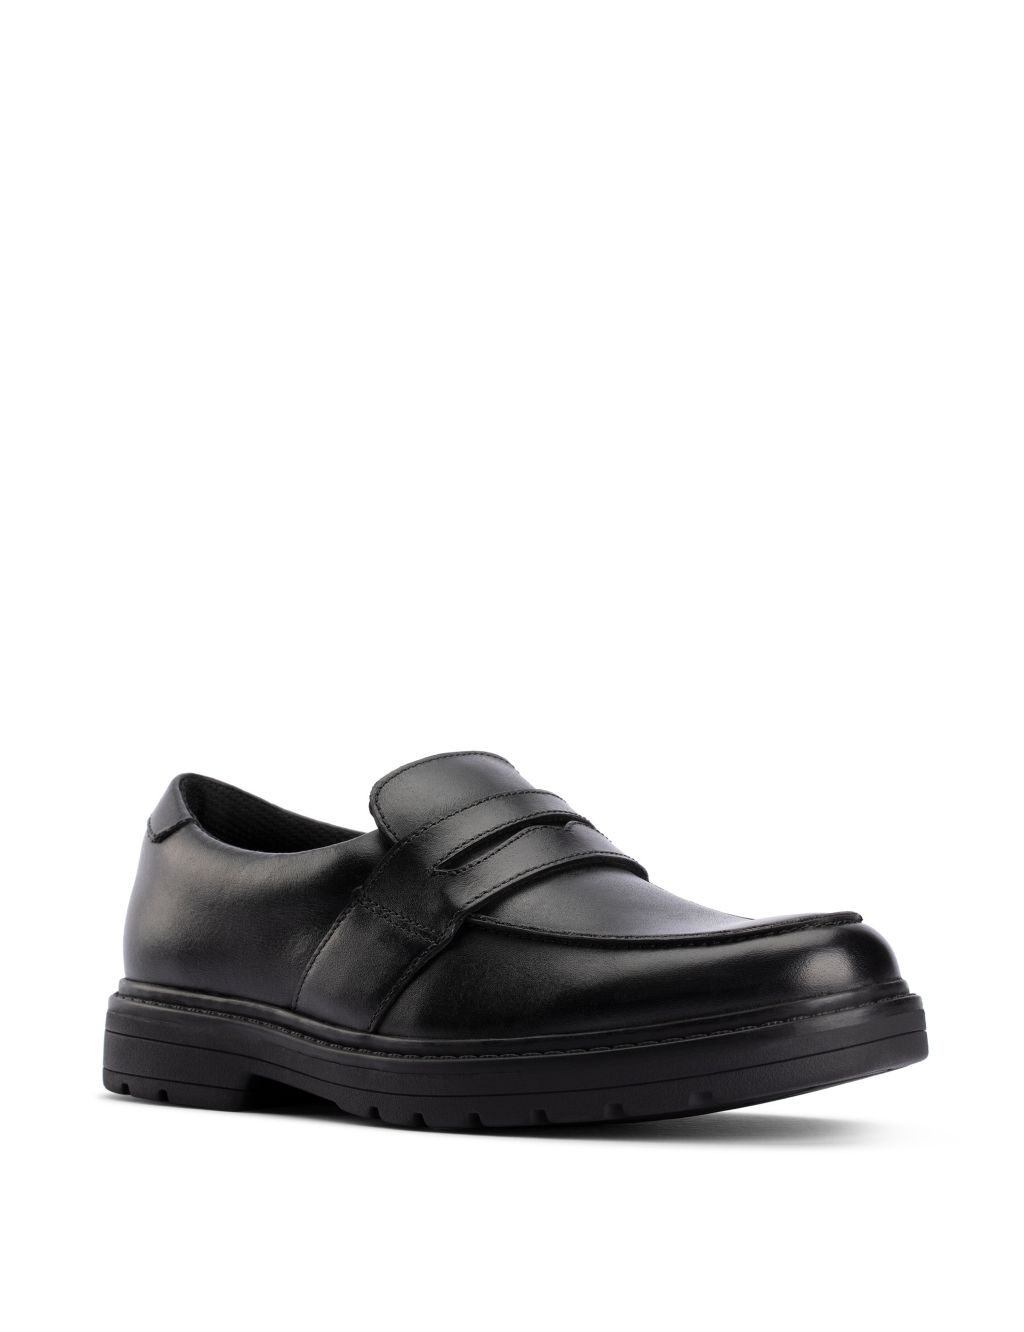 Kids' Leather Slip-On Loafers (3 Small - 7 Small) image 2